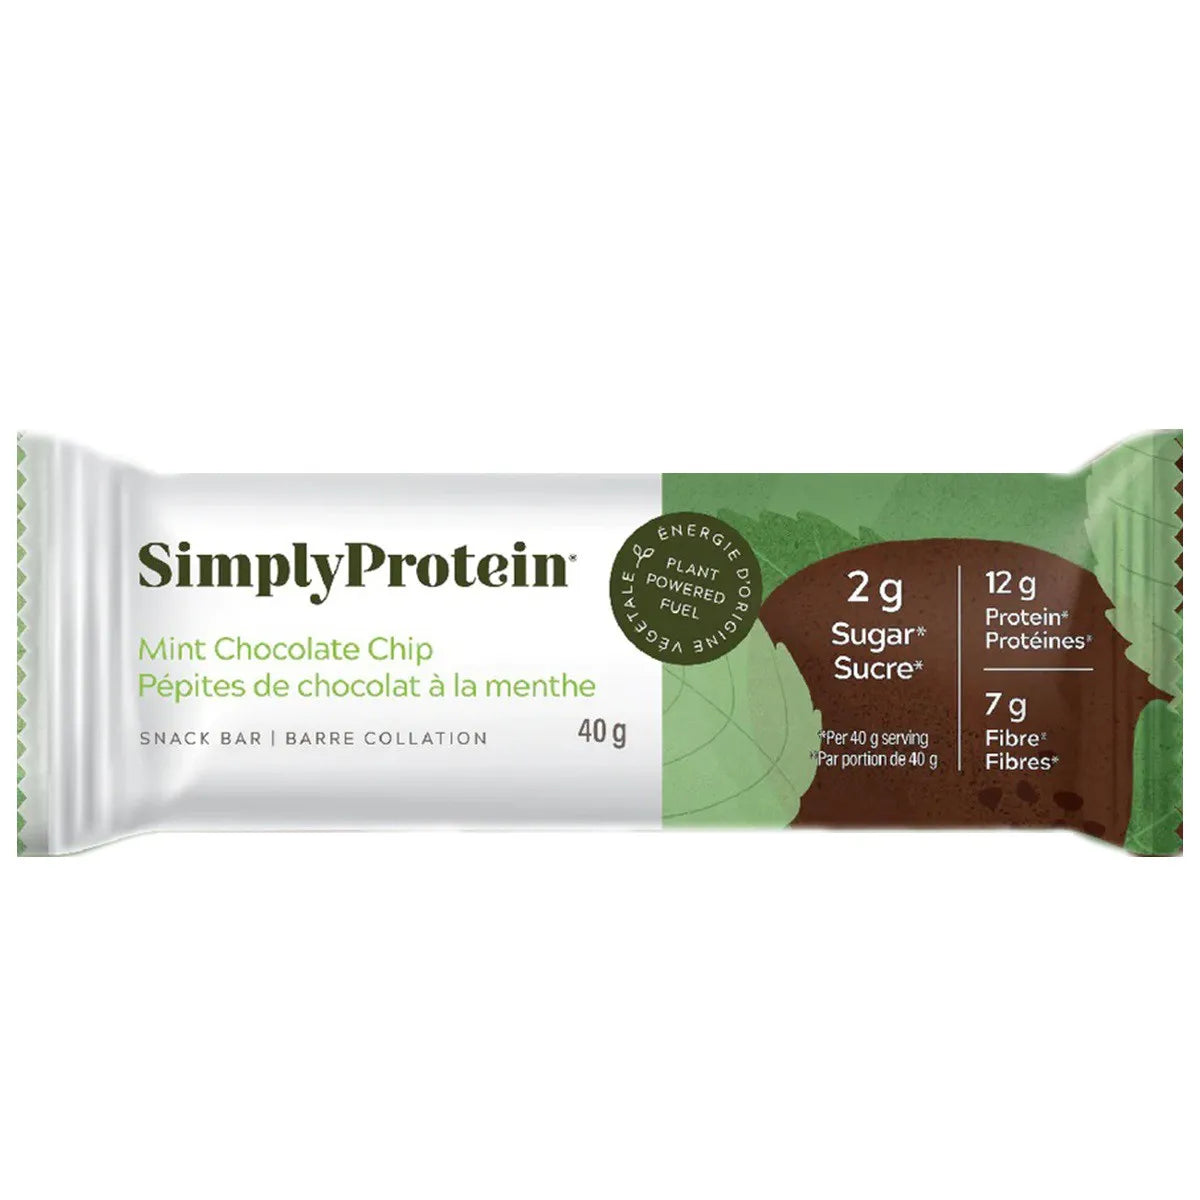 Simply Protein Mint Chocolate Chip